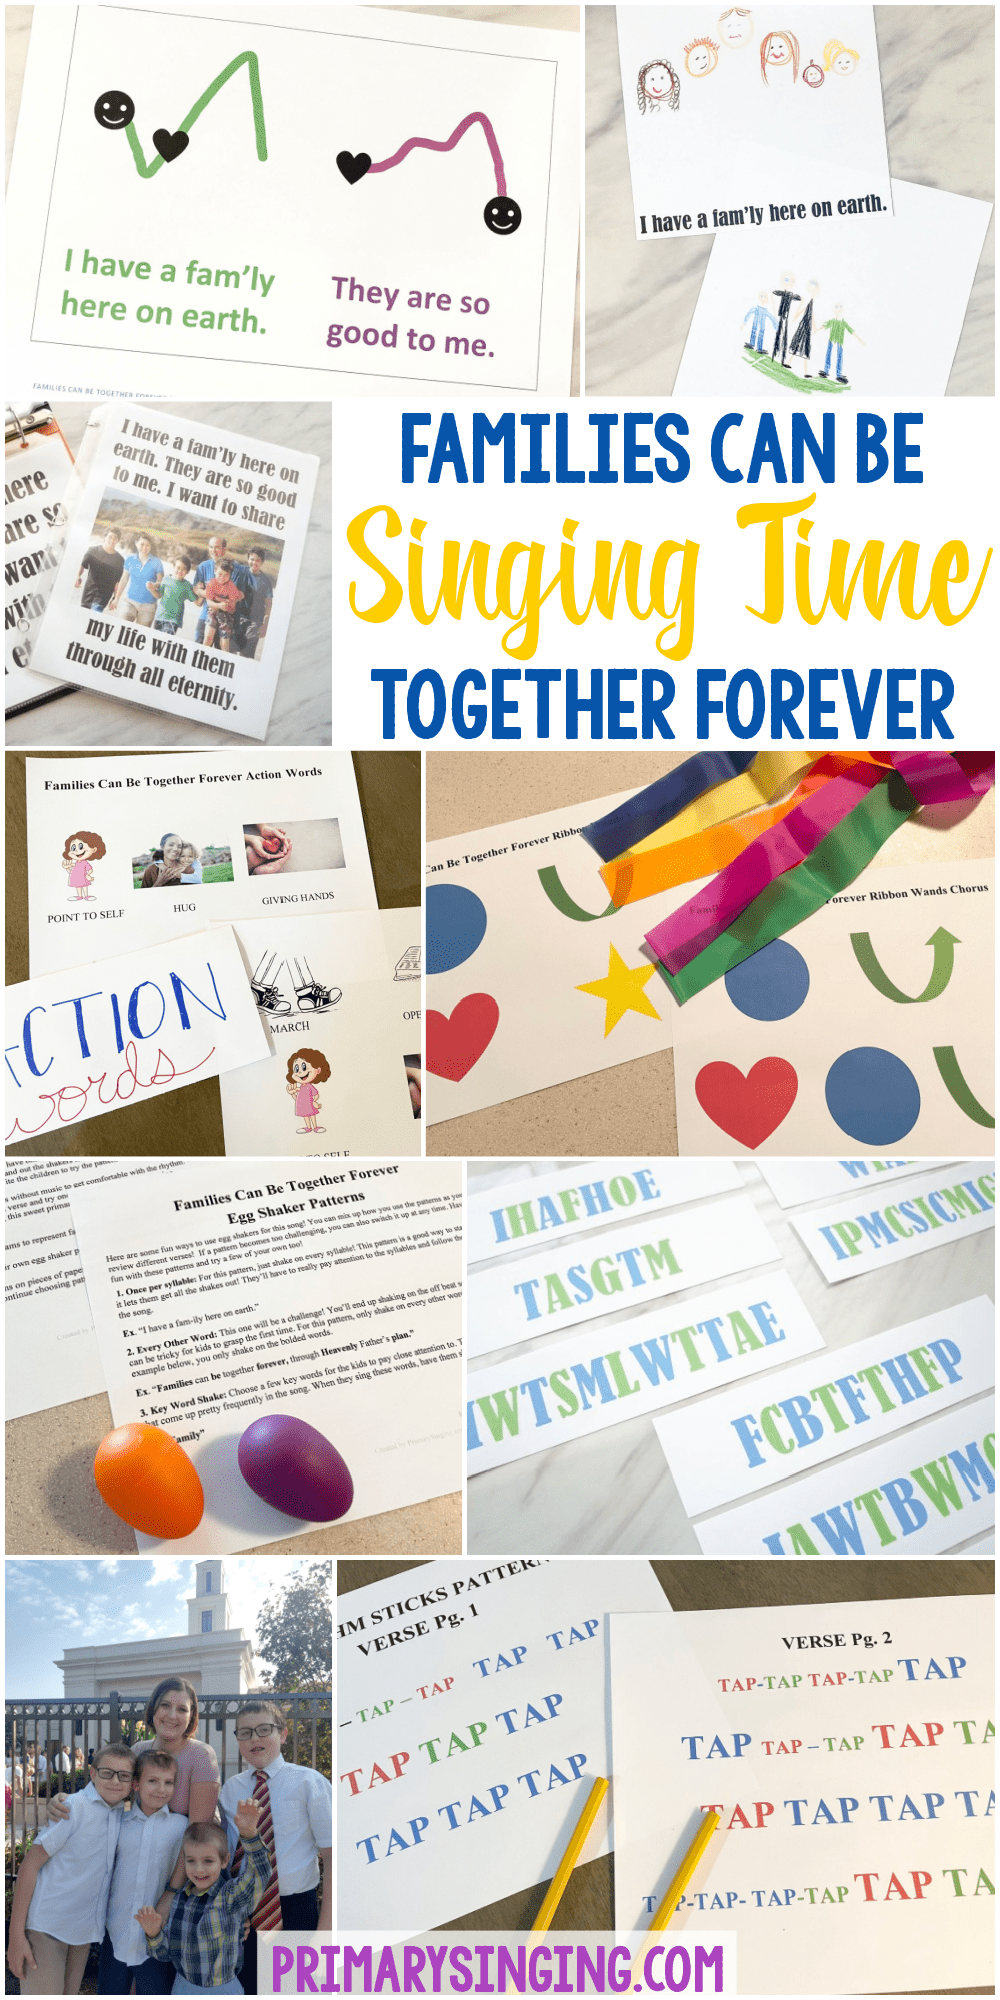 25 Families Can Be Together Forever Singing Time ideas for LDS Primary Music Leaders teaching this song with printable song helps and a variety of fun games, activities, and lesson plans to help you teach the kids with ease!